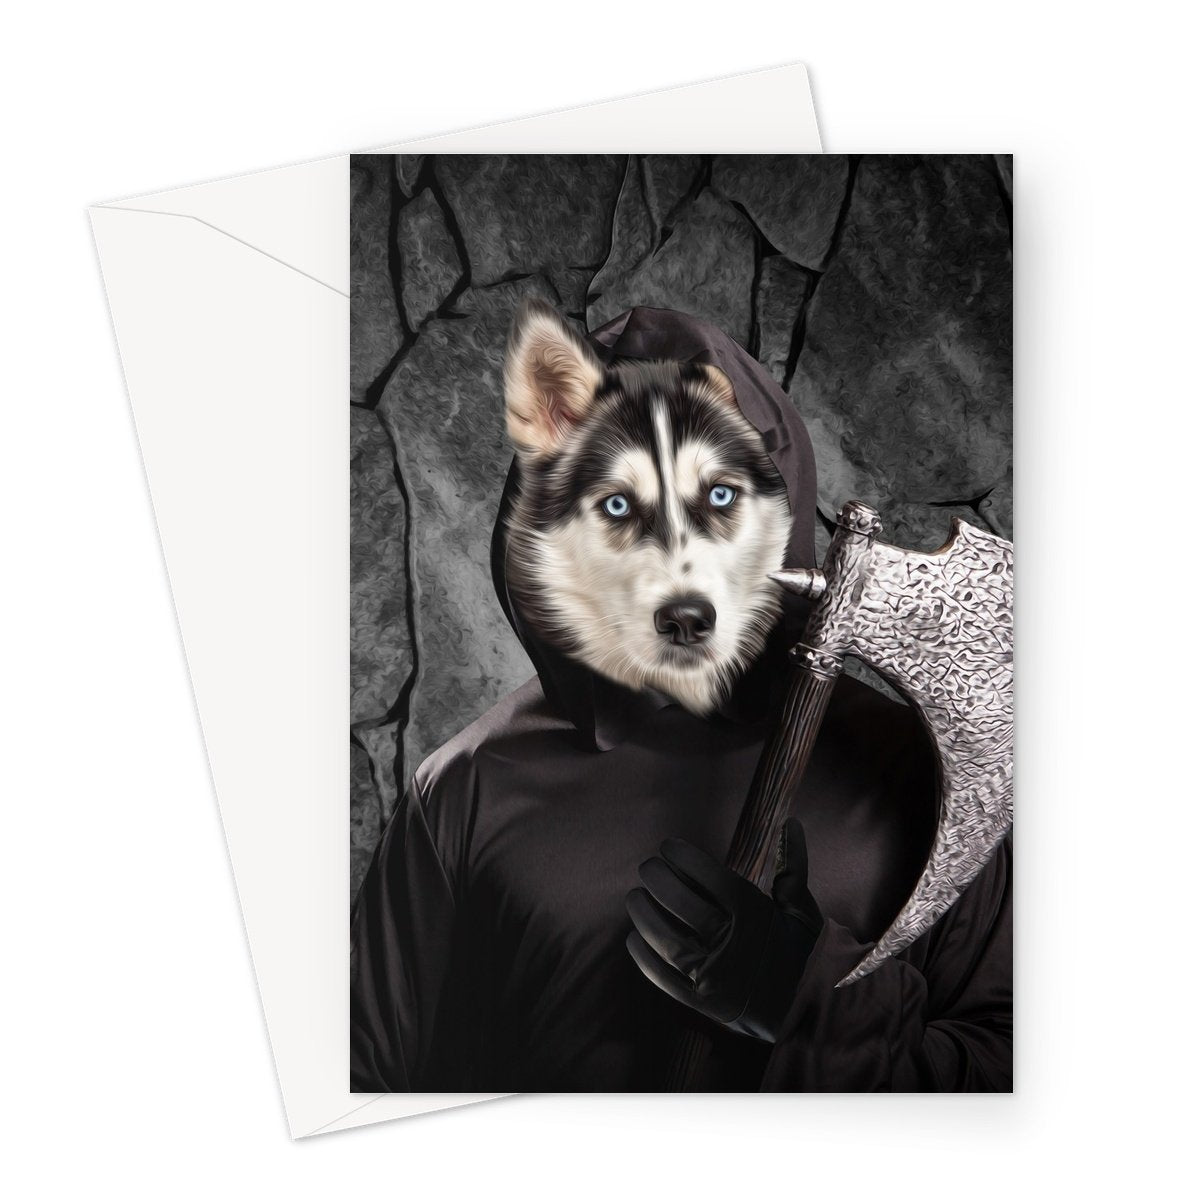 The Bark Reaper: Custom Pet Greeting Card - Paw & Glory - #pet portraits# - #dog portraits# - #pet portraits uk#funny dog paintings, for pet portraits, painting of your dog, pet portraits, professional pet photos, Crown and paw UK alternative